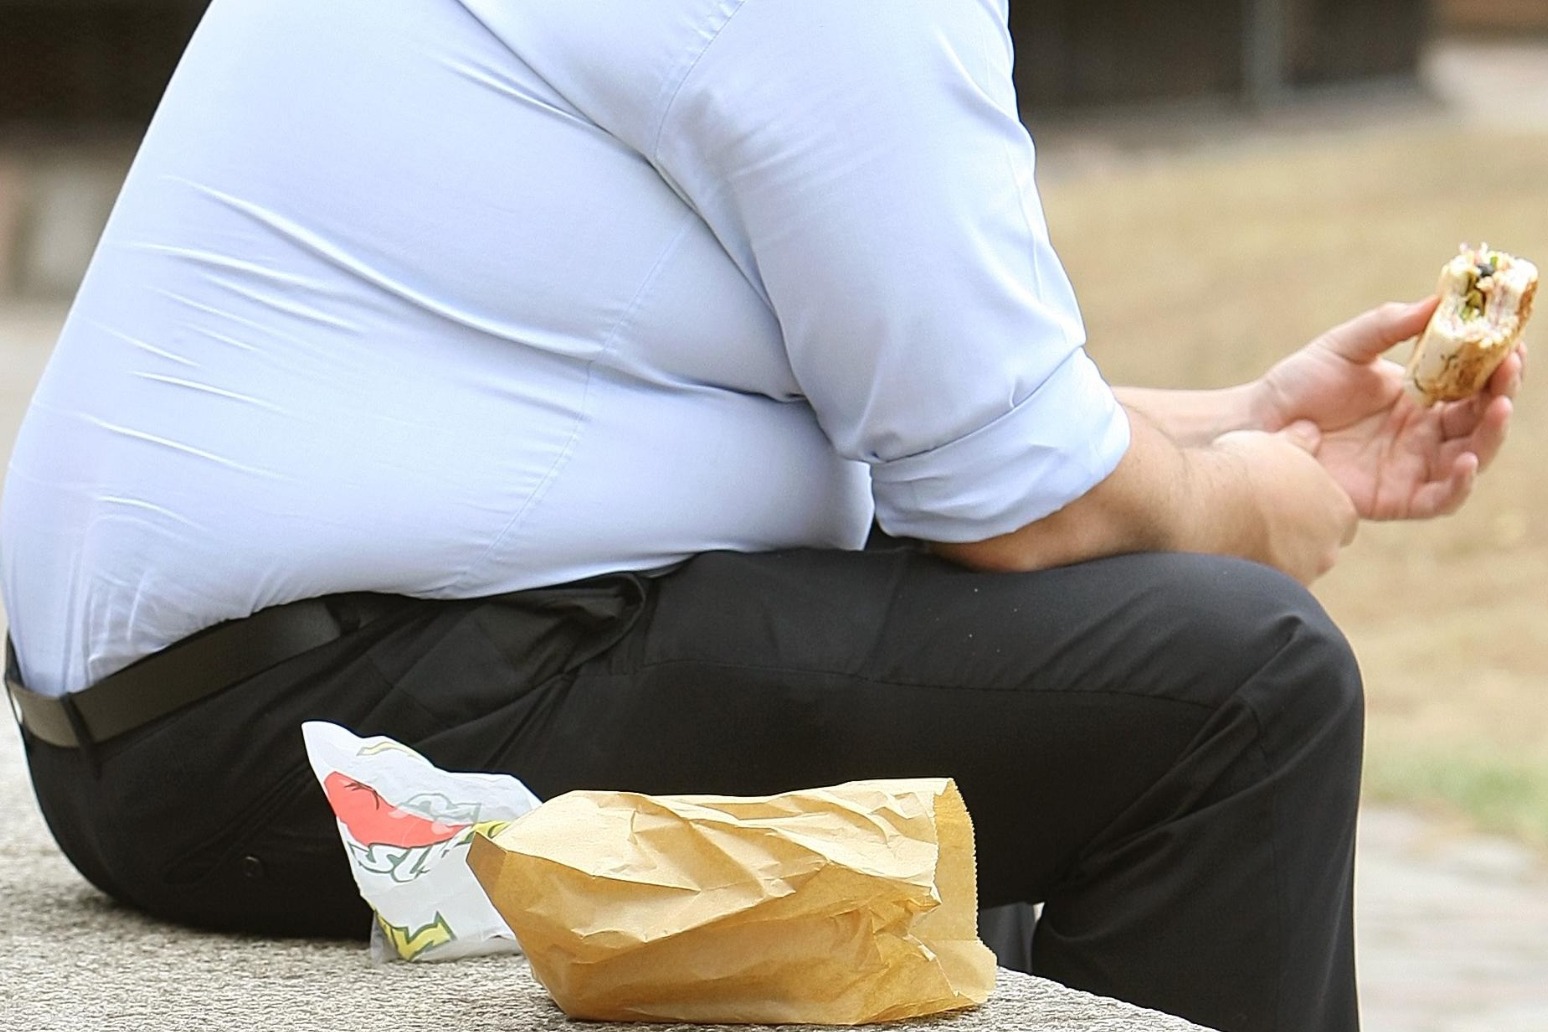 Obesity at ‘epidemic proportions’ in Europe, World Health Organisation warns 